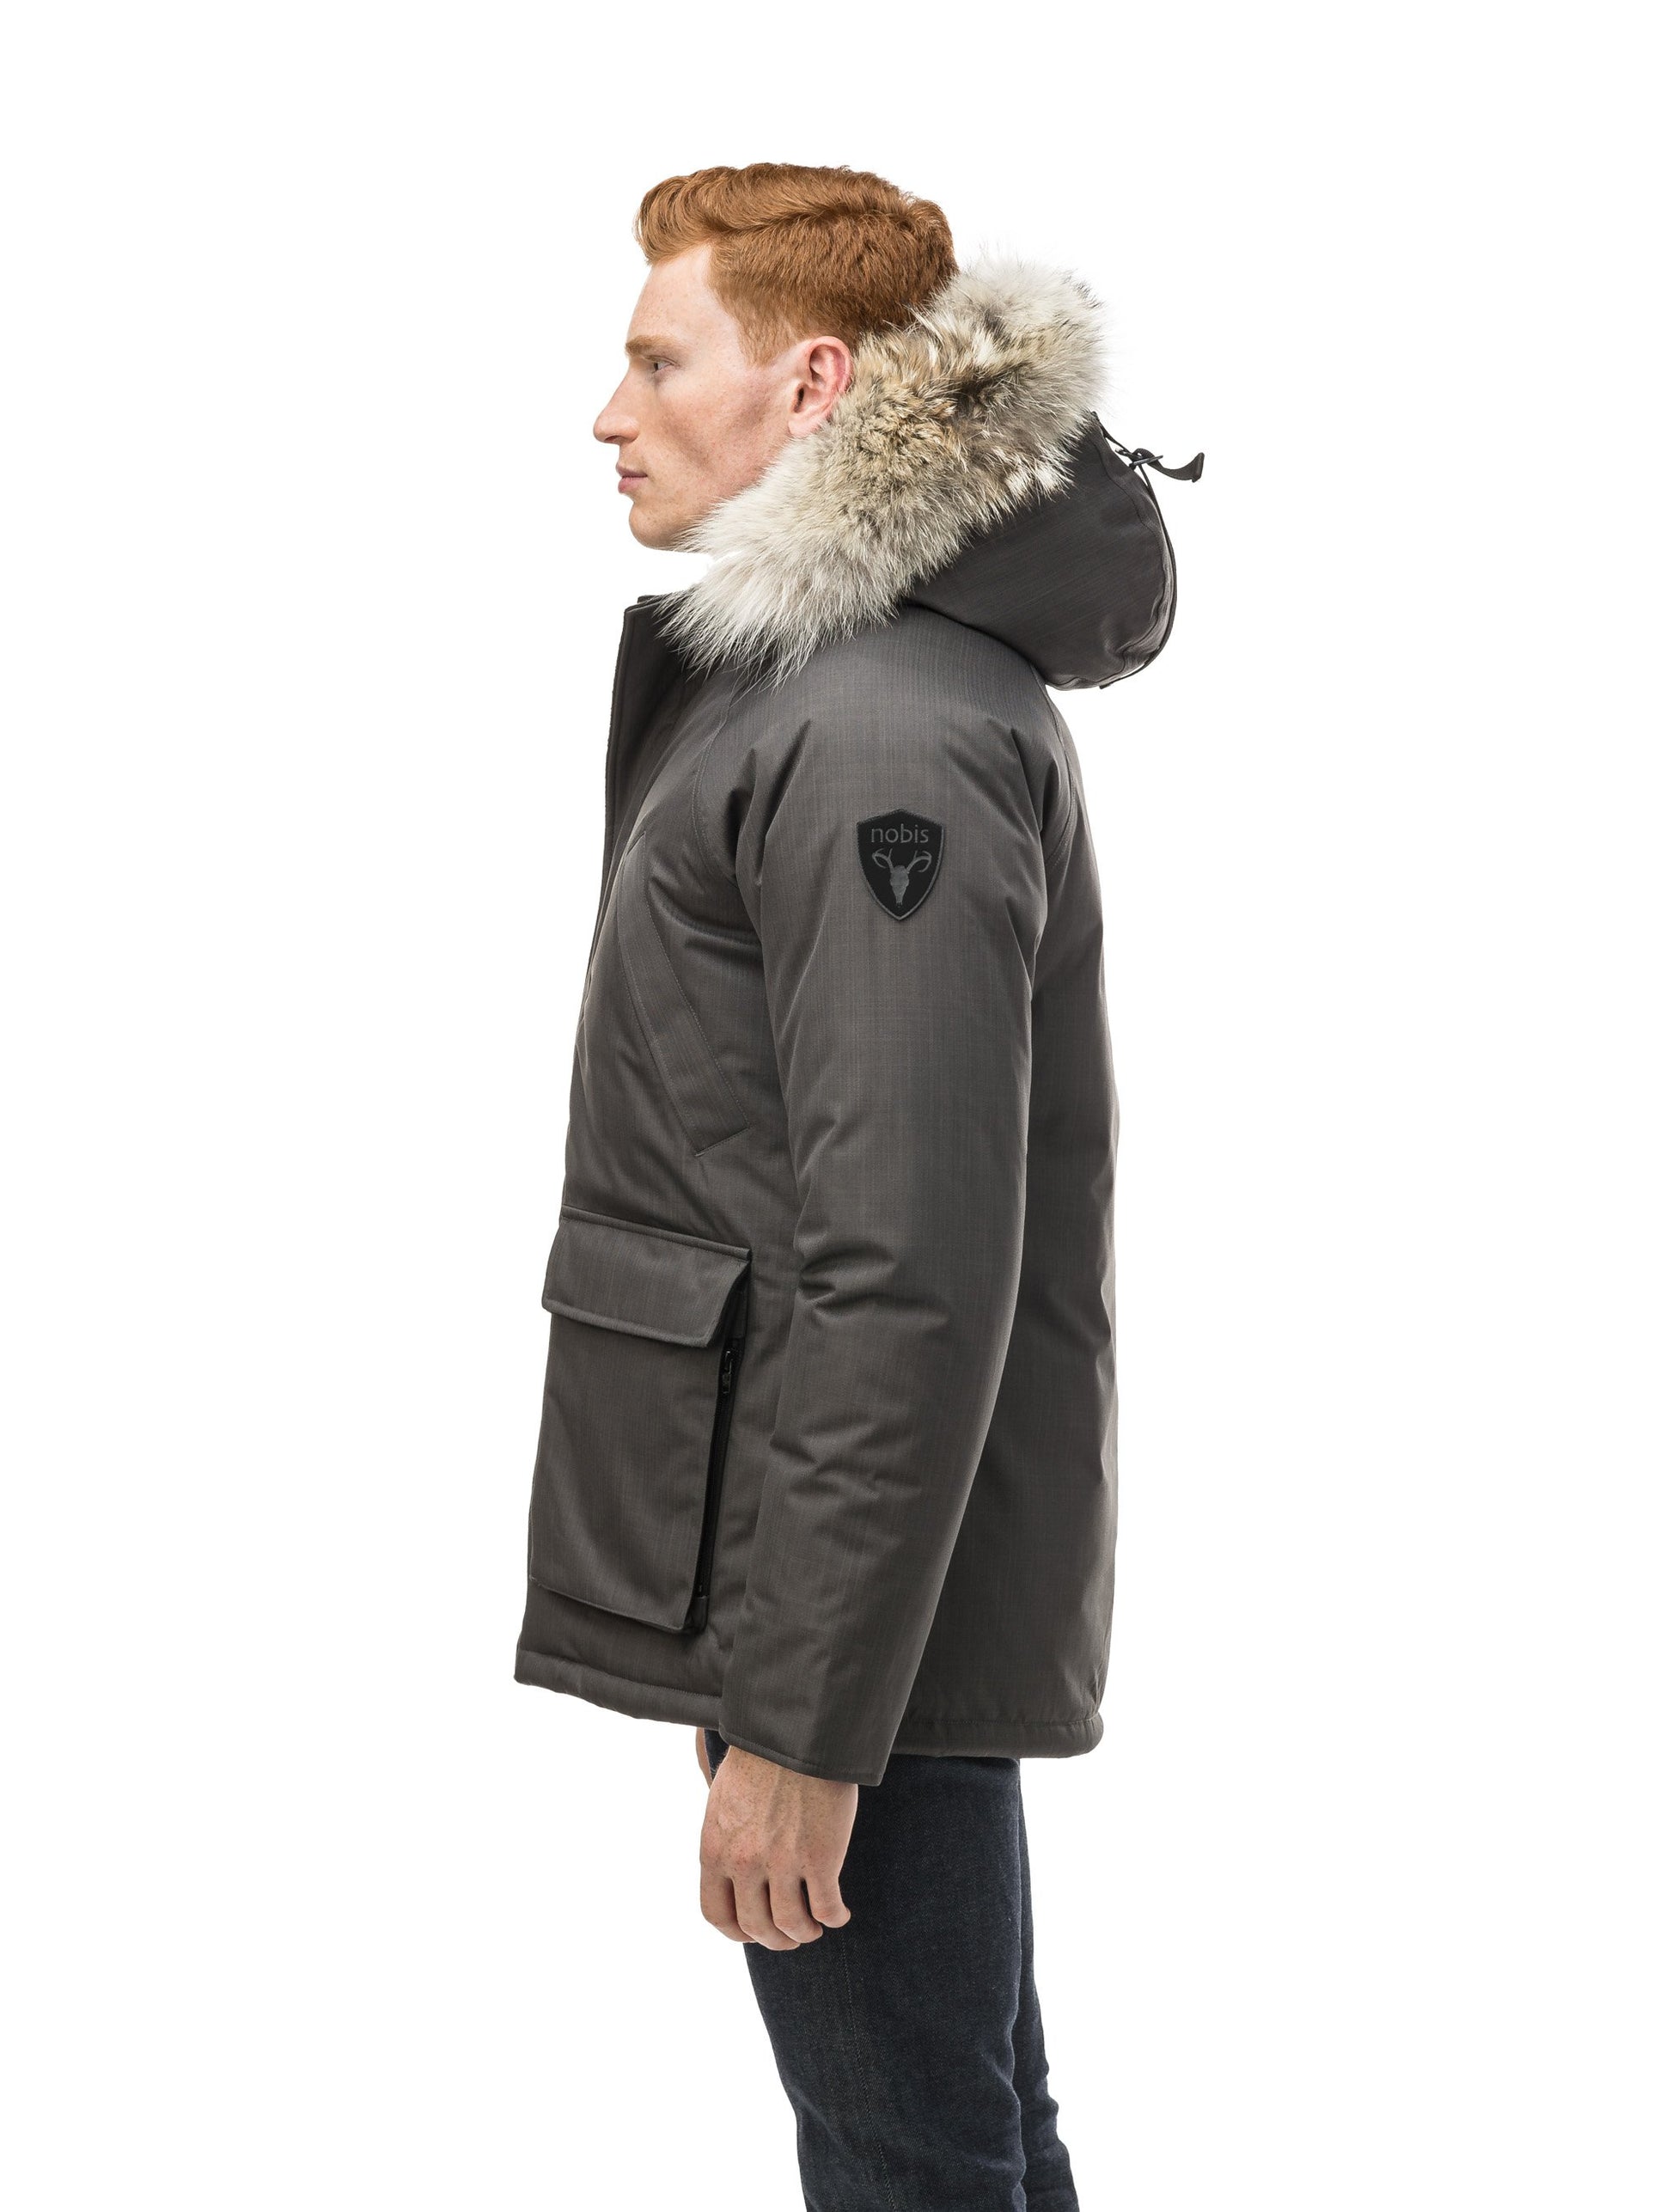 Men's waist length down filled jacket with two front pockets with magnetic closure and a removable fur trim on the hood in CH Steel Grey